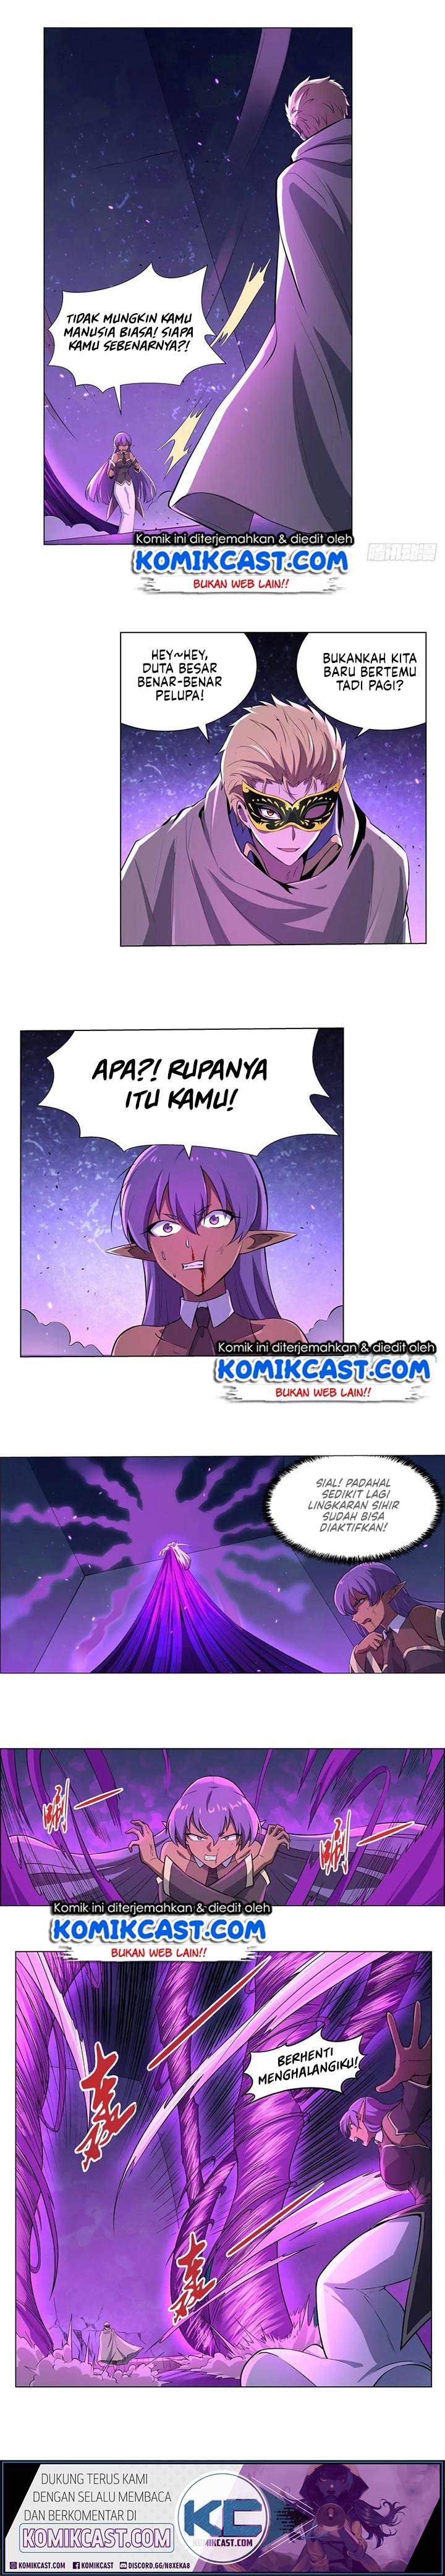 The Demon King Who Lost His Job Chapter 101 Bahasa Indonesia